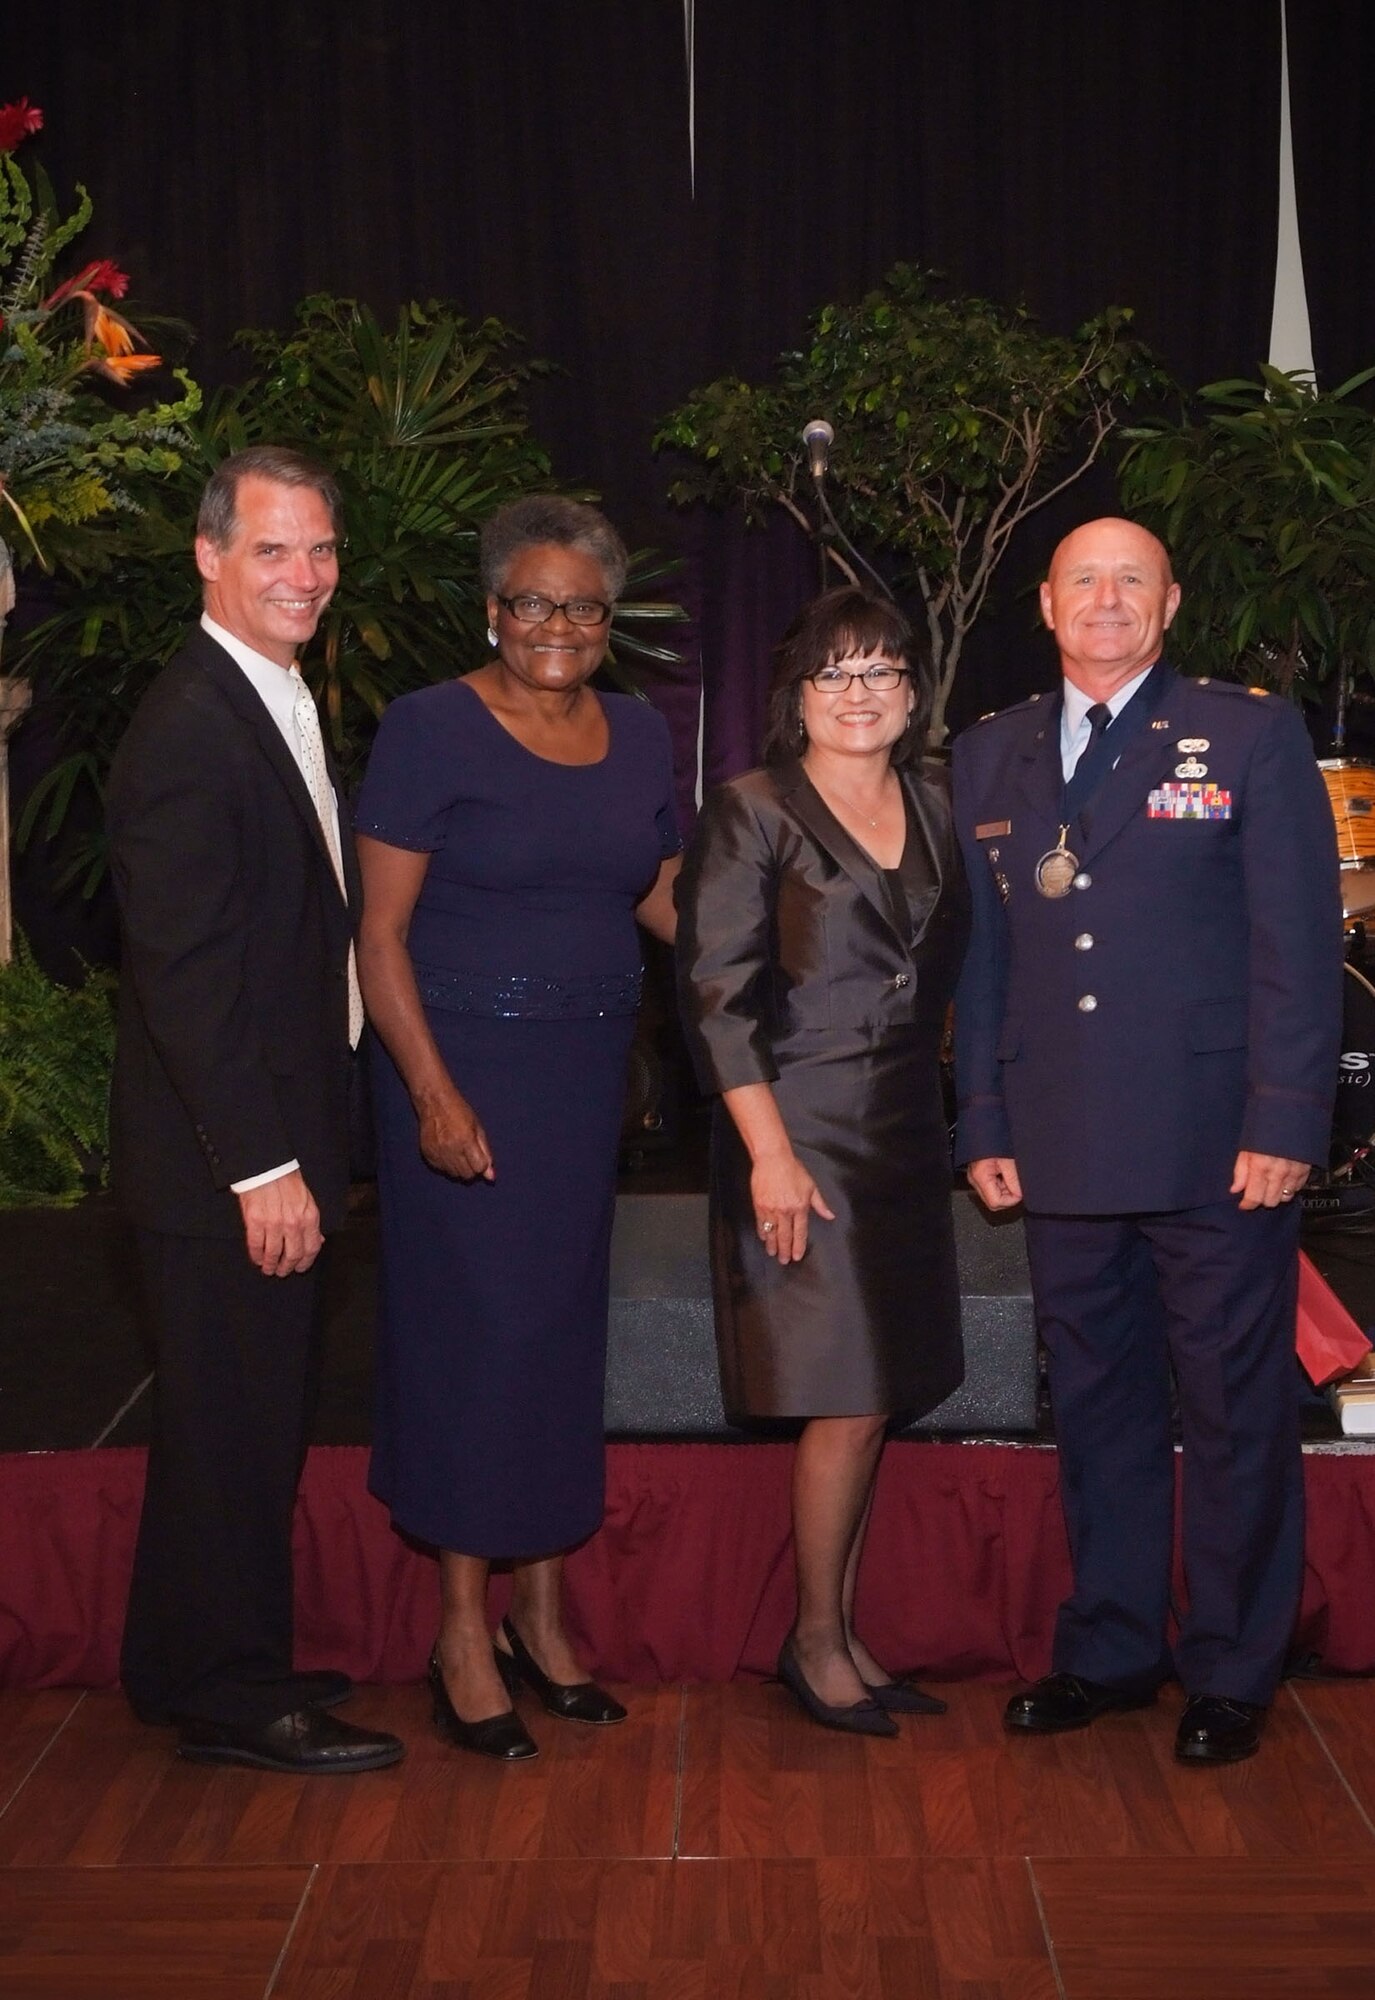 Retired Maj. Donald R. Bailey (far right) was recently named the 2010 Louisiana High School Teacher of the Year. Also pictured from left to right, Rodney Watson, Louisiana Department of Education, assistant superintendent of the Office of Educator Support, Linda Johnson, 8th District Board of Elementary and Secondary Education, Patrice Saucier, Louisiana Department of Education, director of the Division of Professional Development. (Courtesy photo)